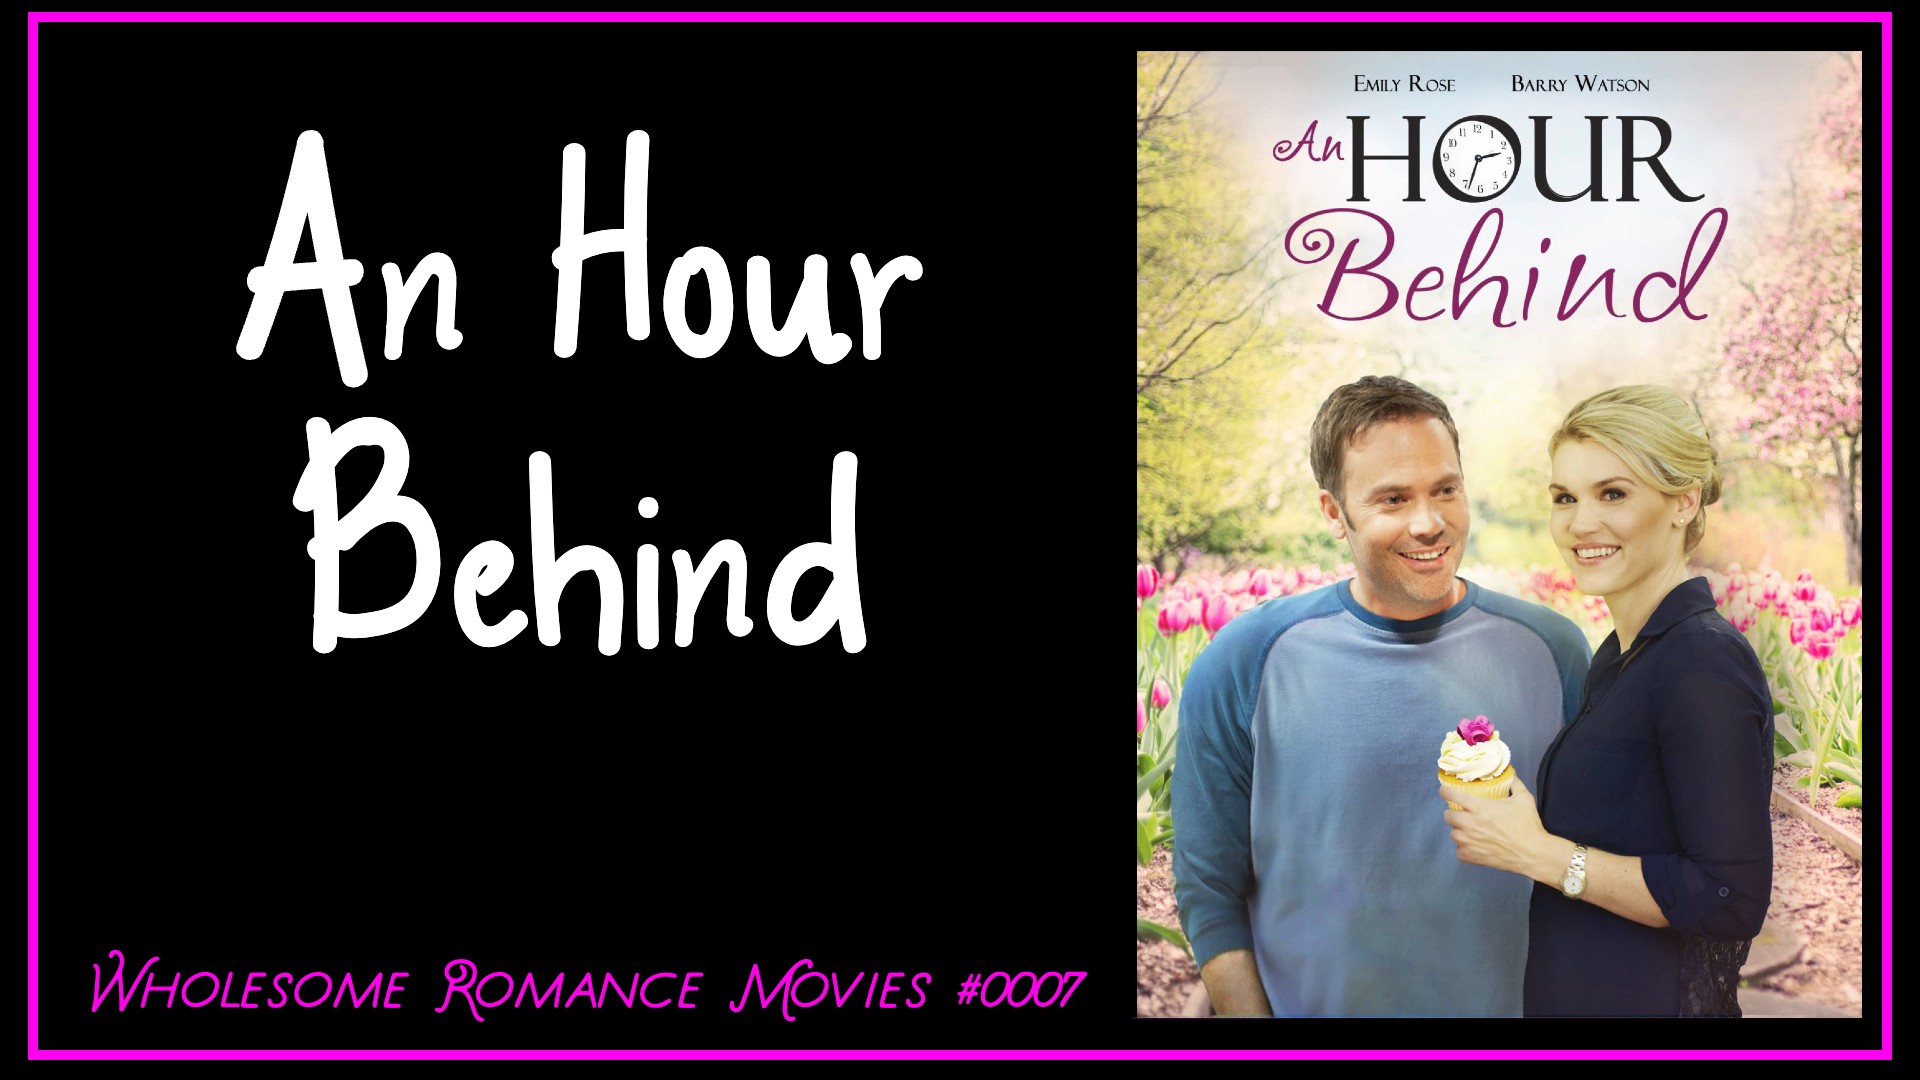 An Hour Behind (2017) WRM Review